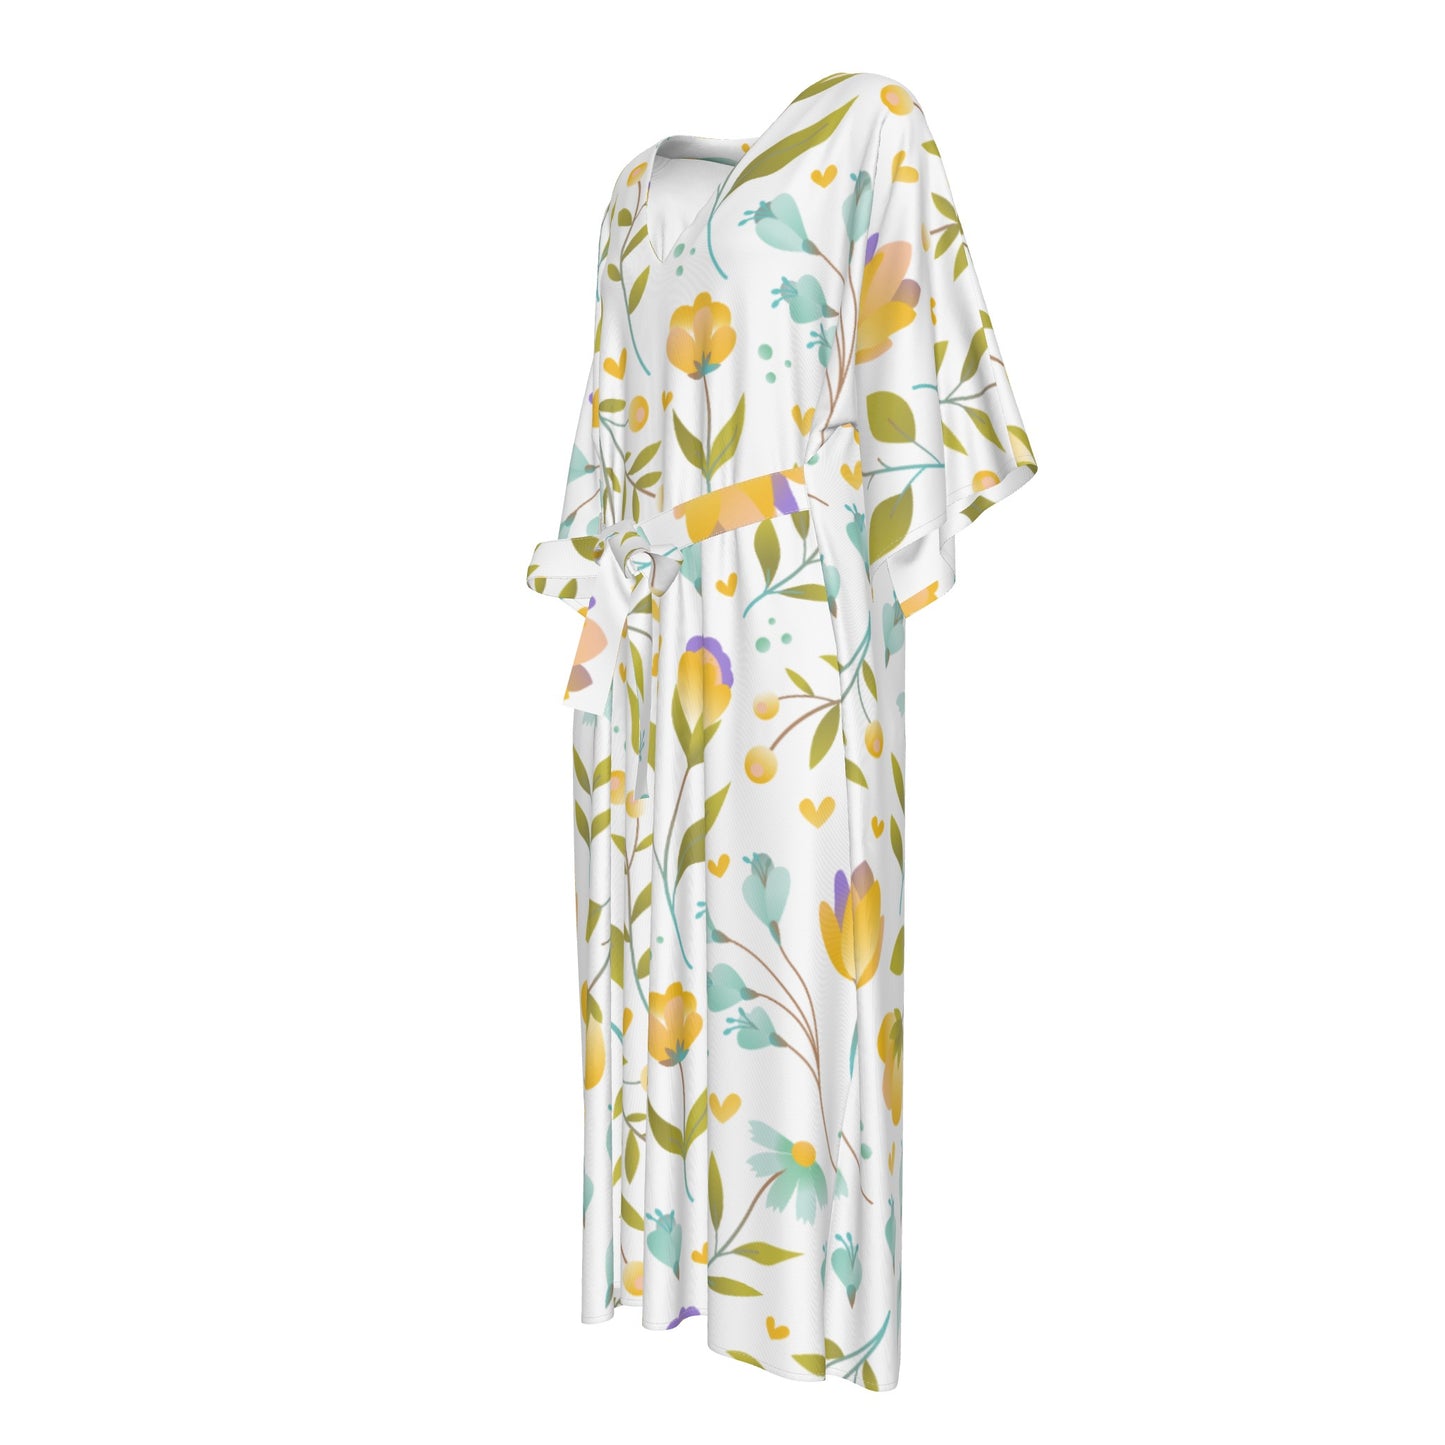 Women's mid calf dress - Yellow and blue flowers